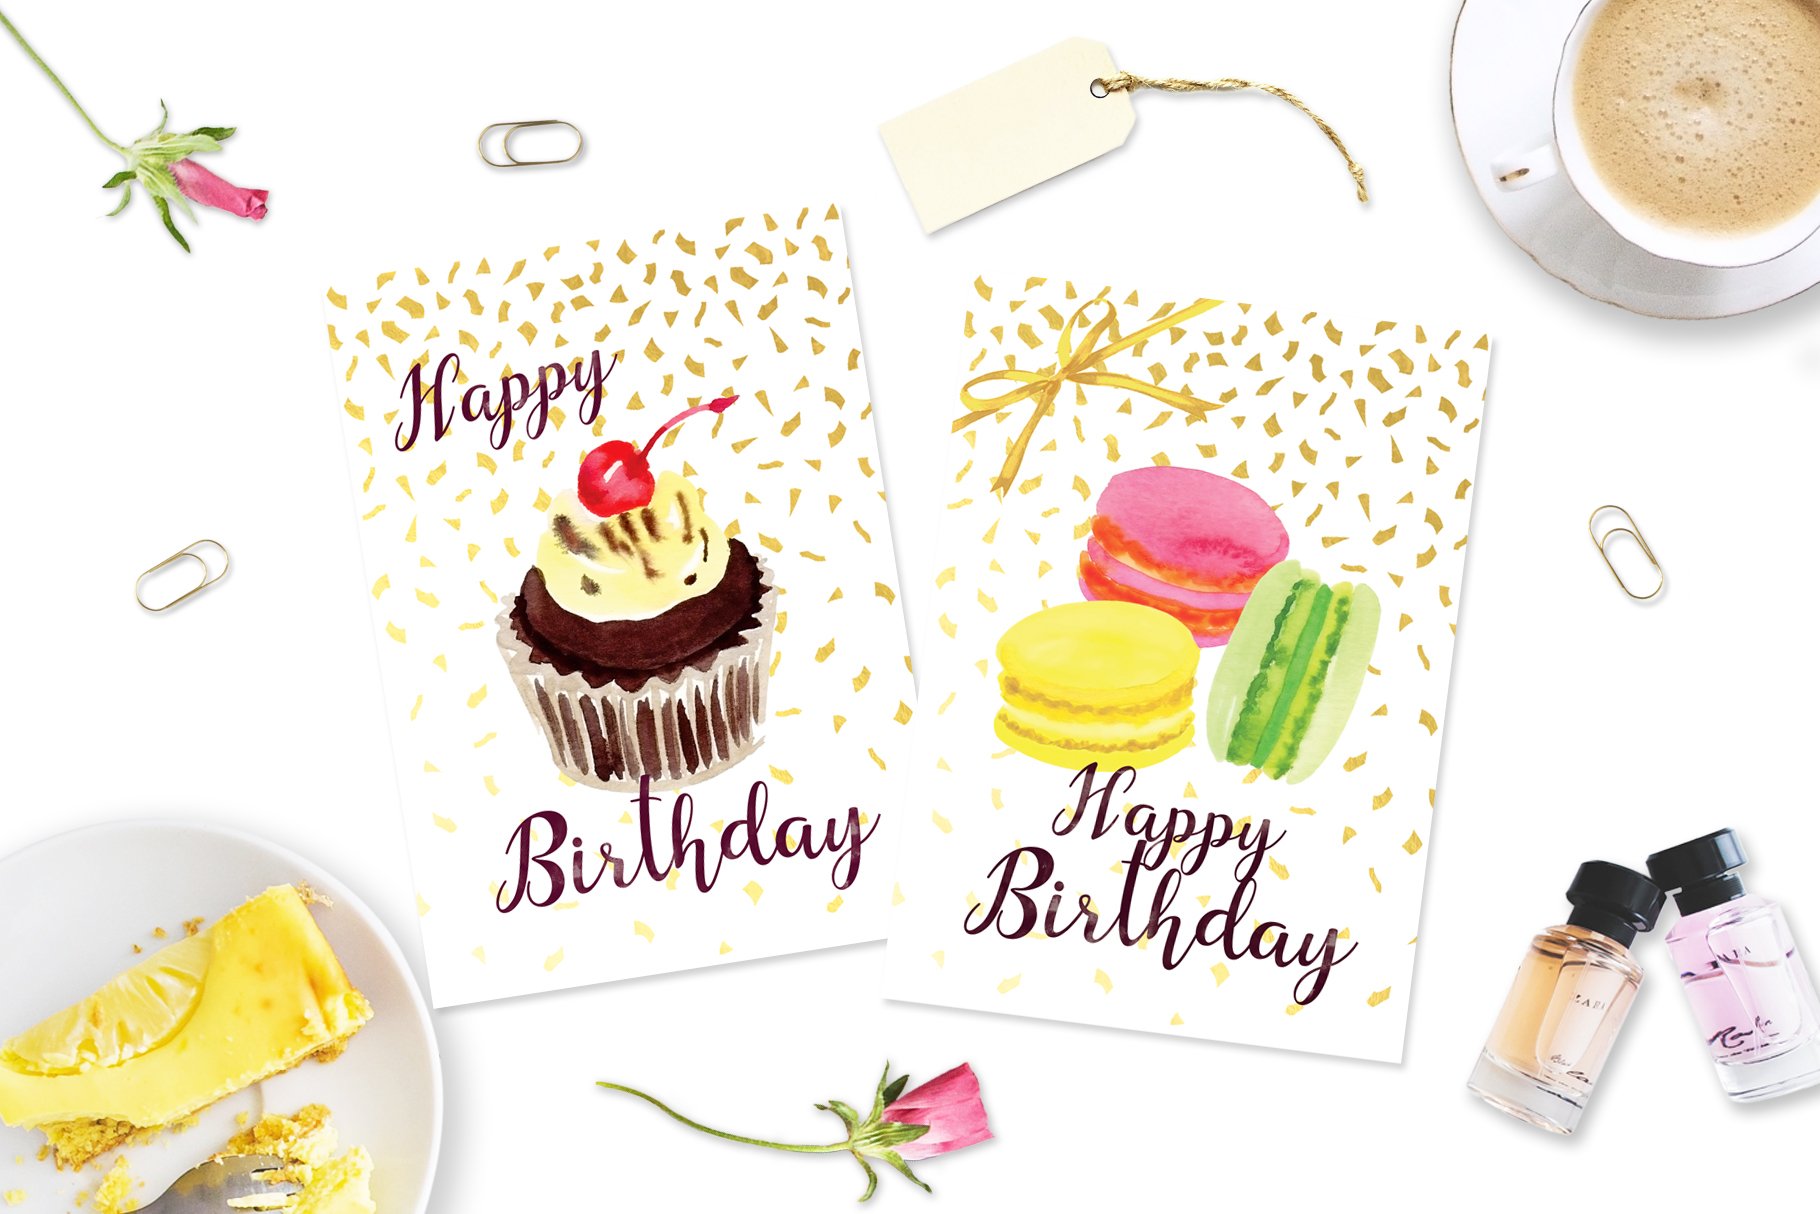 Two greeting cards with different sweets.